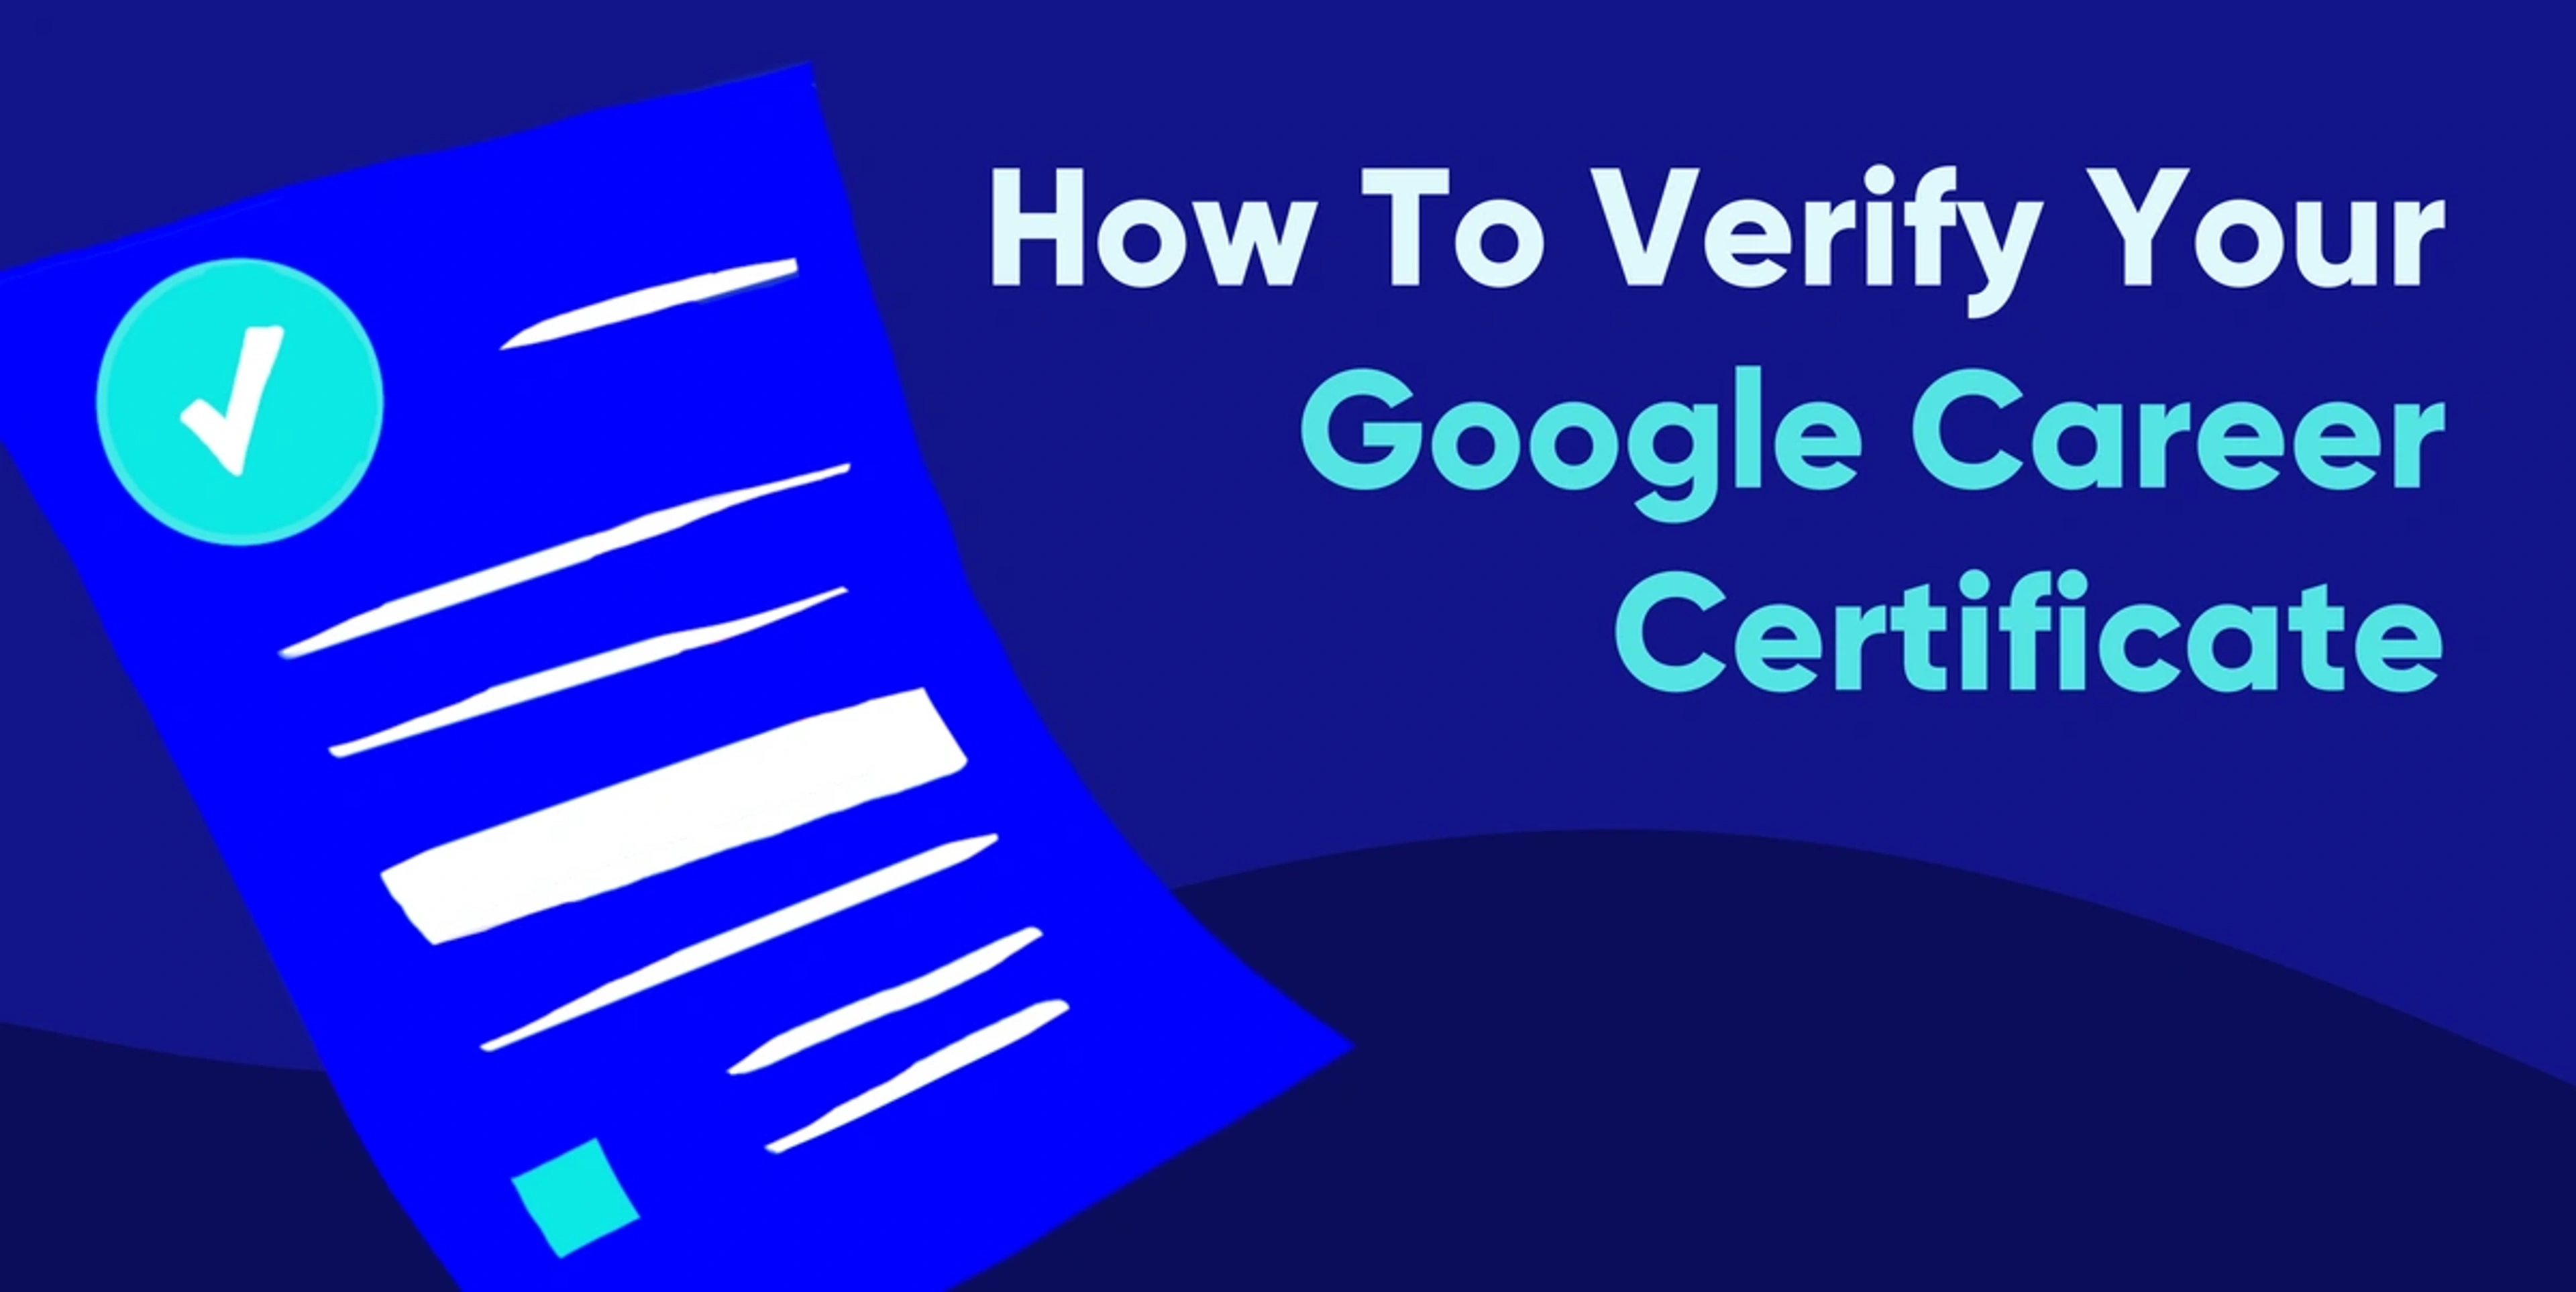 How To Verify Your Google Career Certificate in CareerCircle